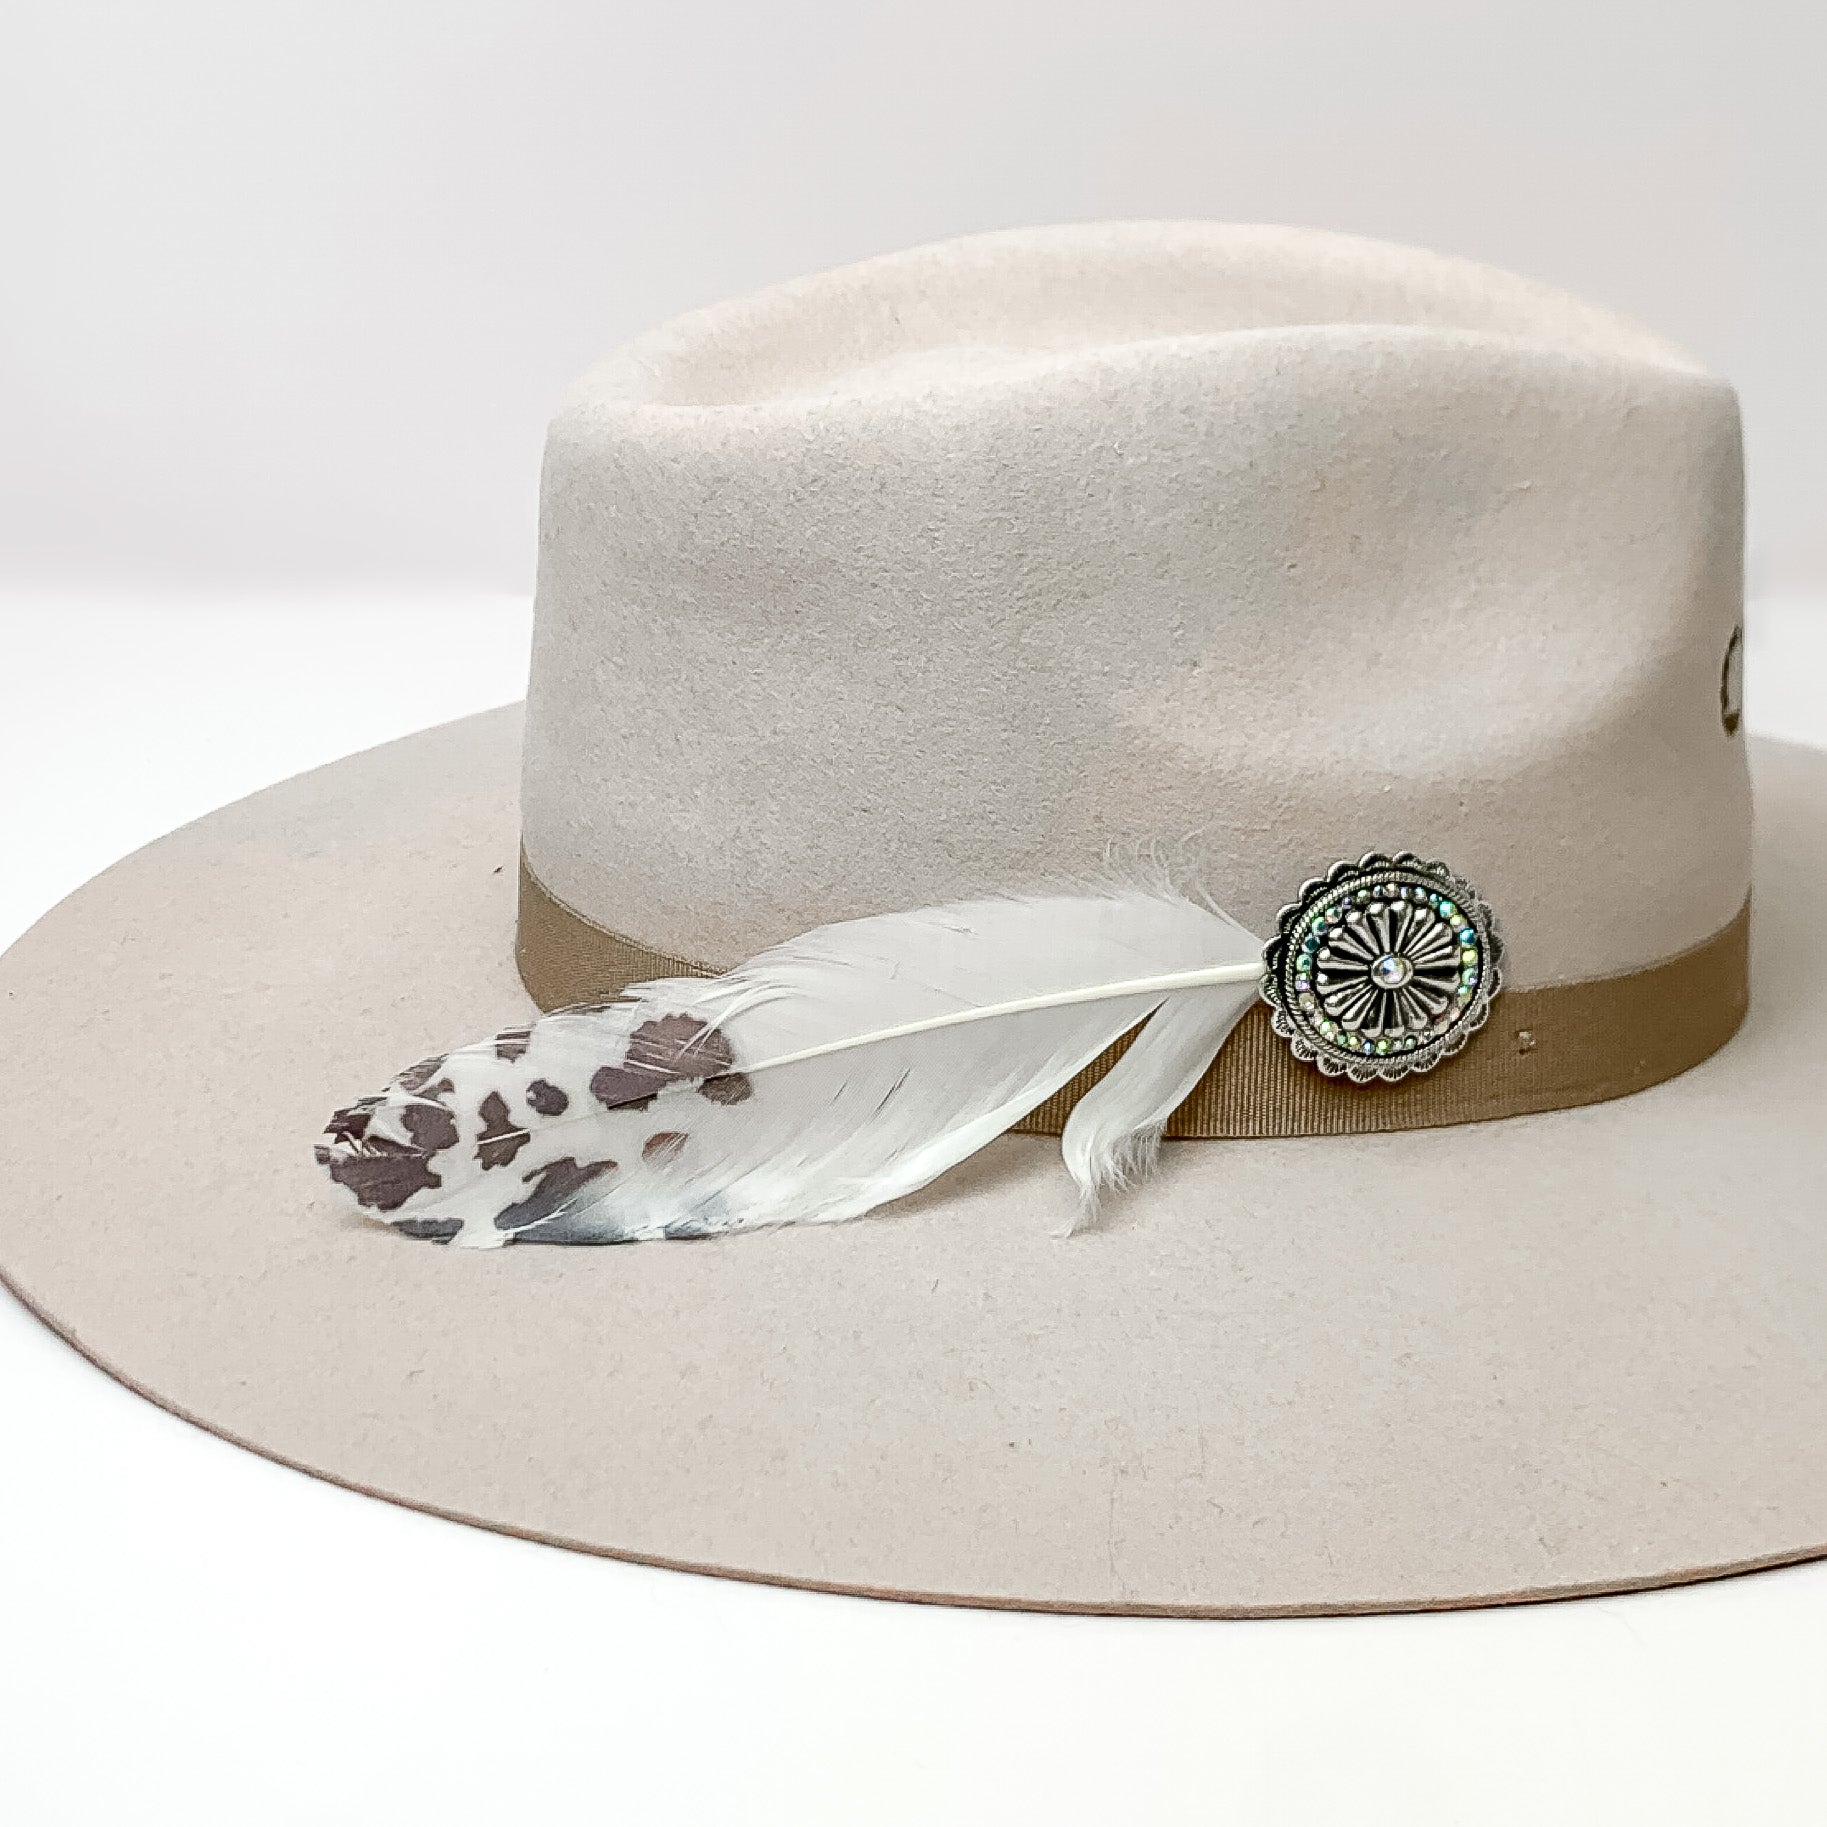 Oval Concho With white and black Feathers Hat Pin With AB crystals. Pictured on a white background with the pin on the side of a light grey/ brown hat.